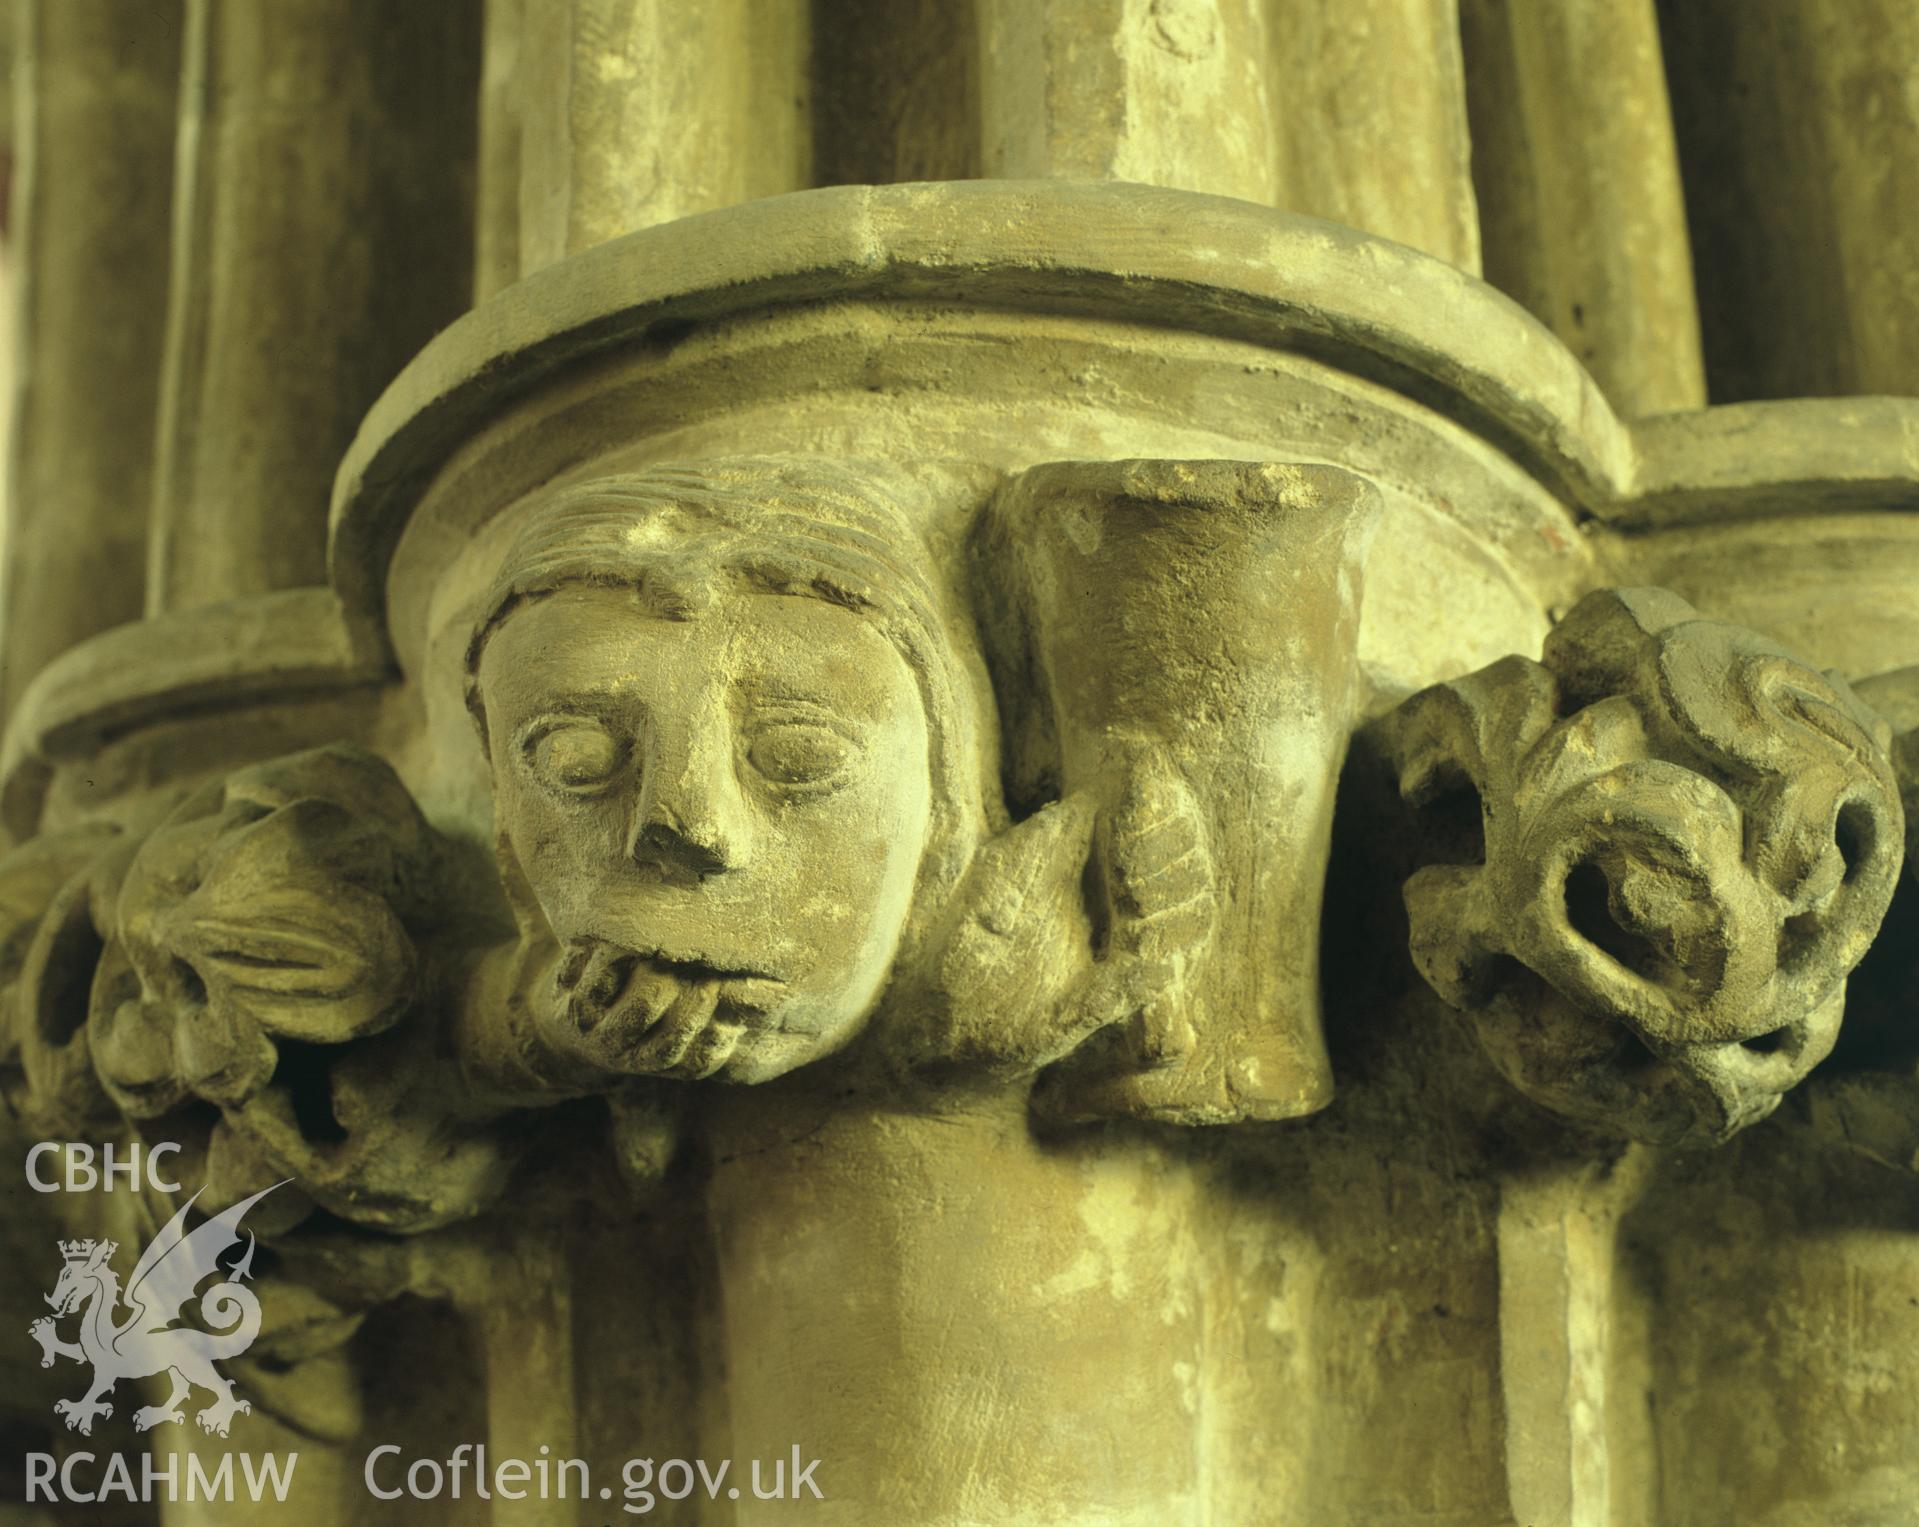 RCAHMW colour transparency showing detail of capital at St Marys Church, Haverfordwest, taken by Iain Wright, 2003.